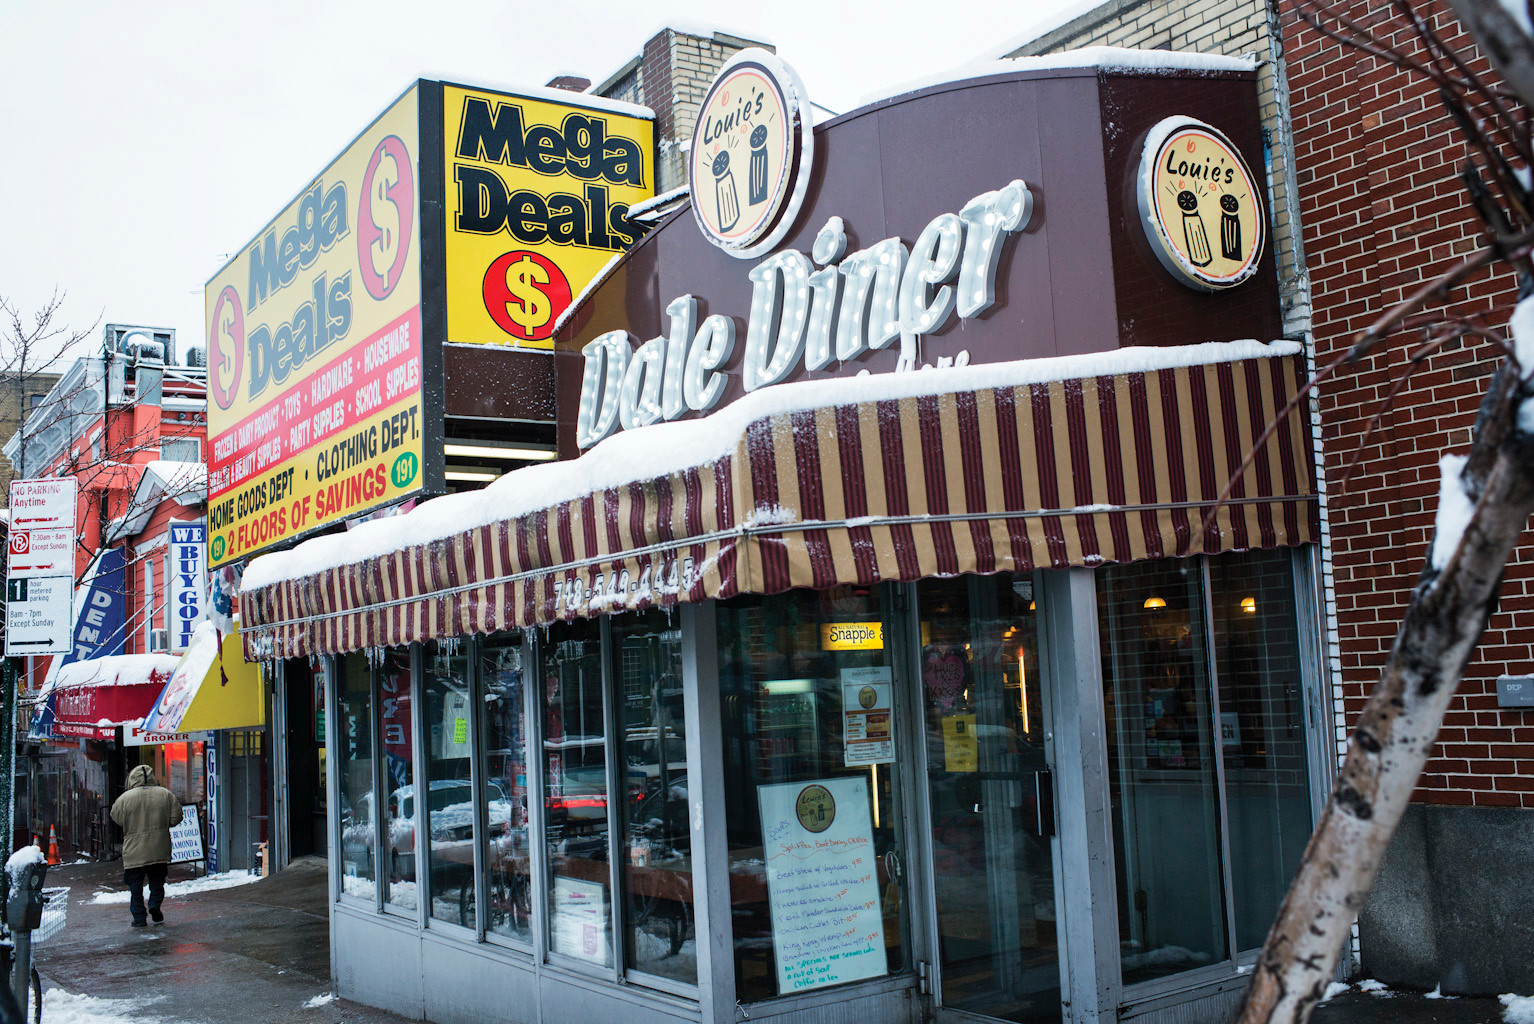 The exterior of Louie's Dale Diner in Kingsbridge on Monday.